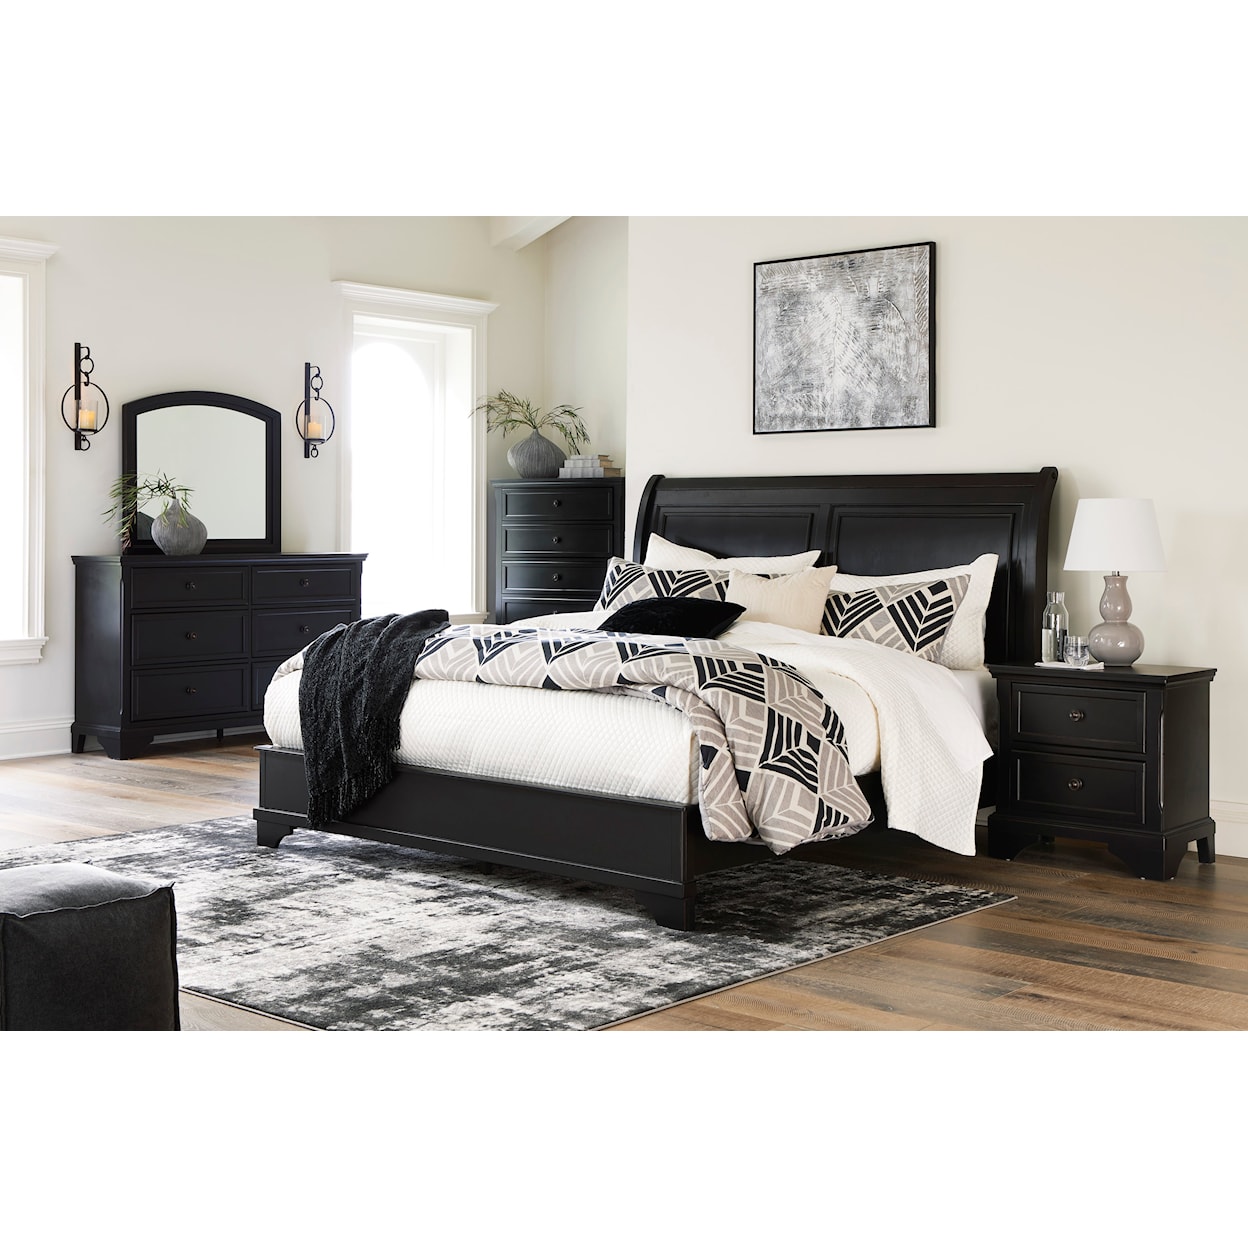 Signature Design by Ashley Chylanta Queen Sleigh Bed